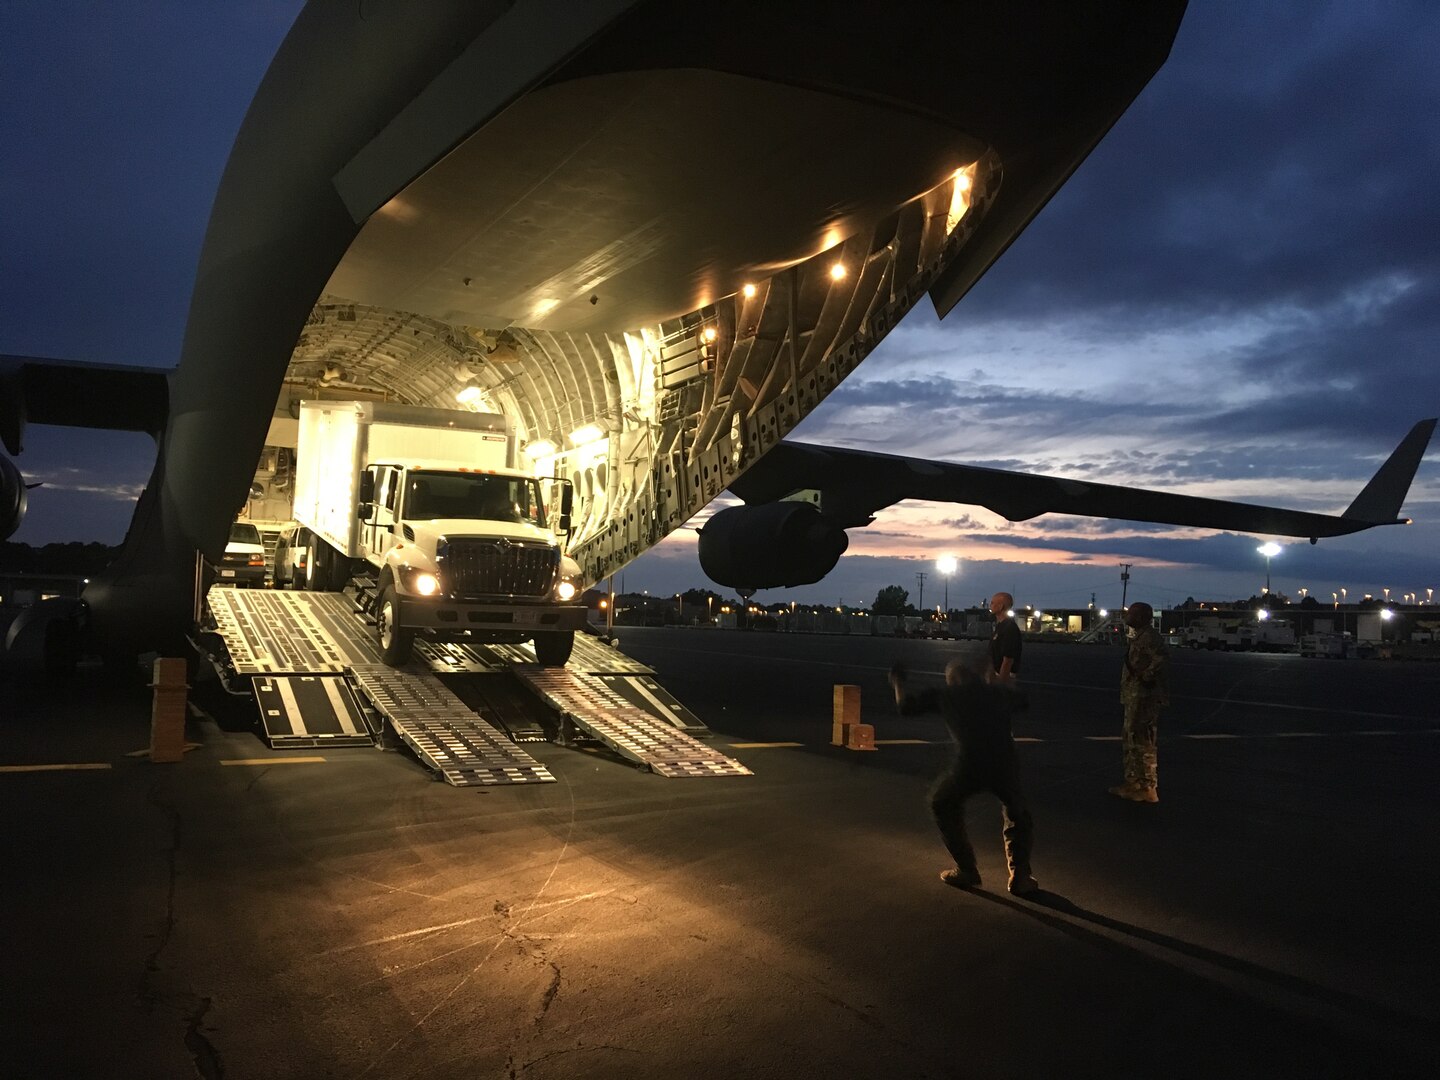 Members of Joint Task Force Civil Support (JTF-CS) and airmen from Langley Air Force Base load vehicles onto a Boeing C-17 Globemaster III during a no-notice Deployment Readiness Exercise (DRE). The purpose of the DRE was to test both commands ability to rapidly deploy during an incident. When directed, JTF-CS is ready to respond in 24 hours to provide command and control of 5,200 federal military forces located at more than 36 locations throughout the nation acting in support of civil authority response operations to save lives, prevent further injury, and provide critical support to enable community recover. (Official DoD photo by Air Force Lt. Col. Karen Roganov /released)